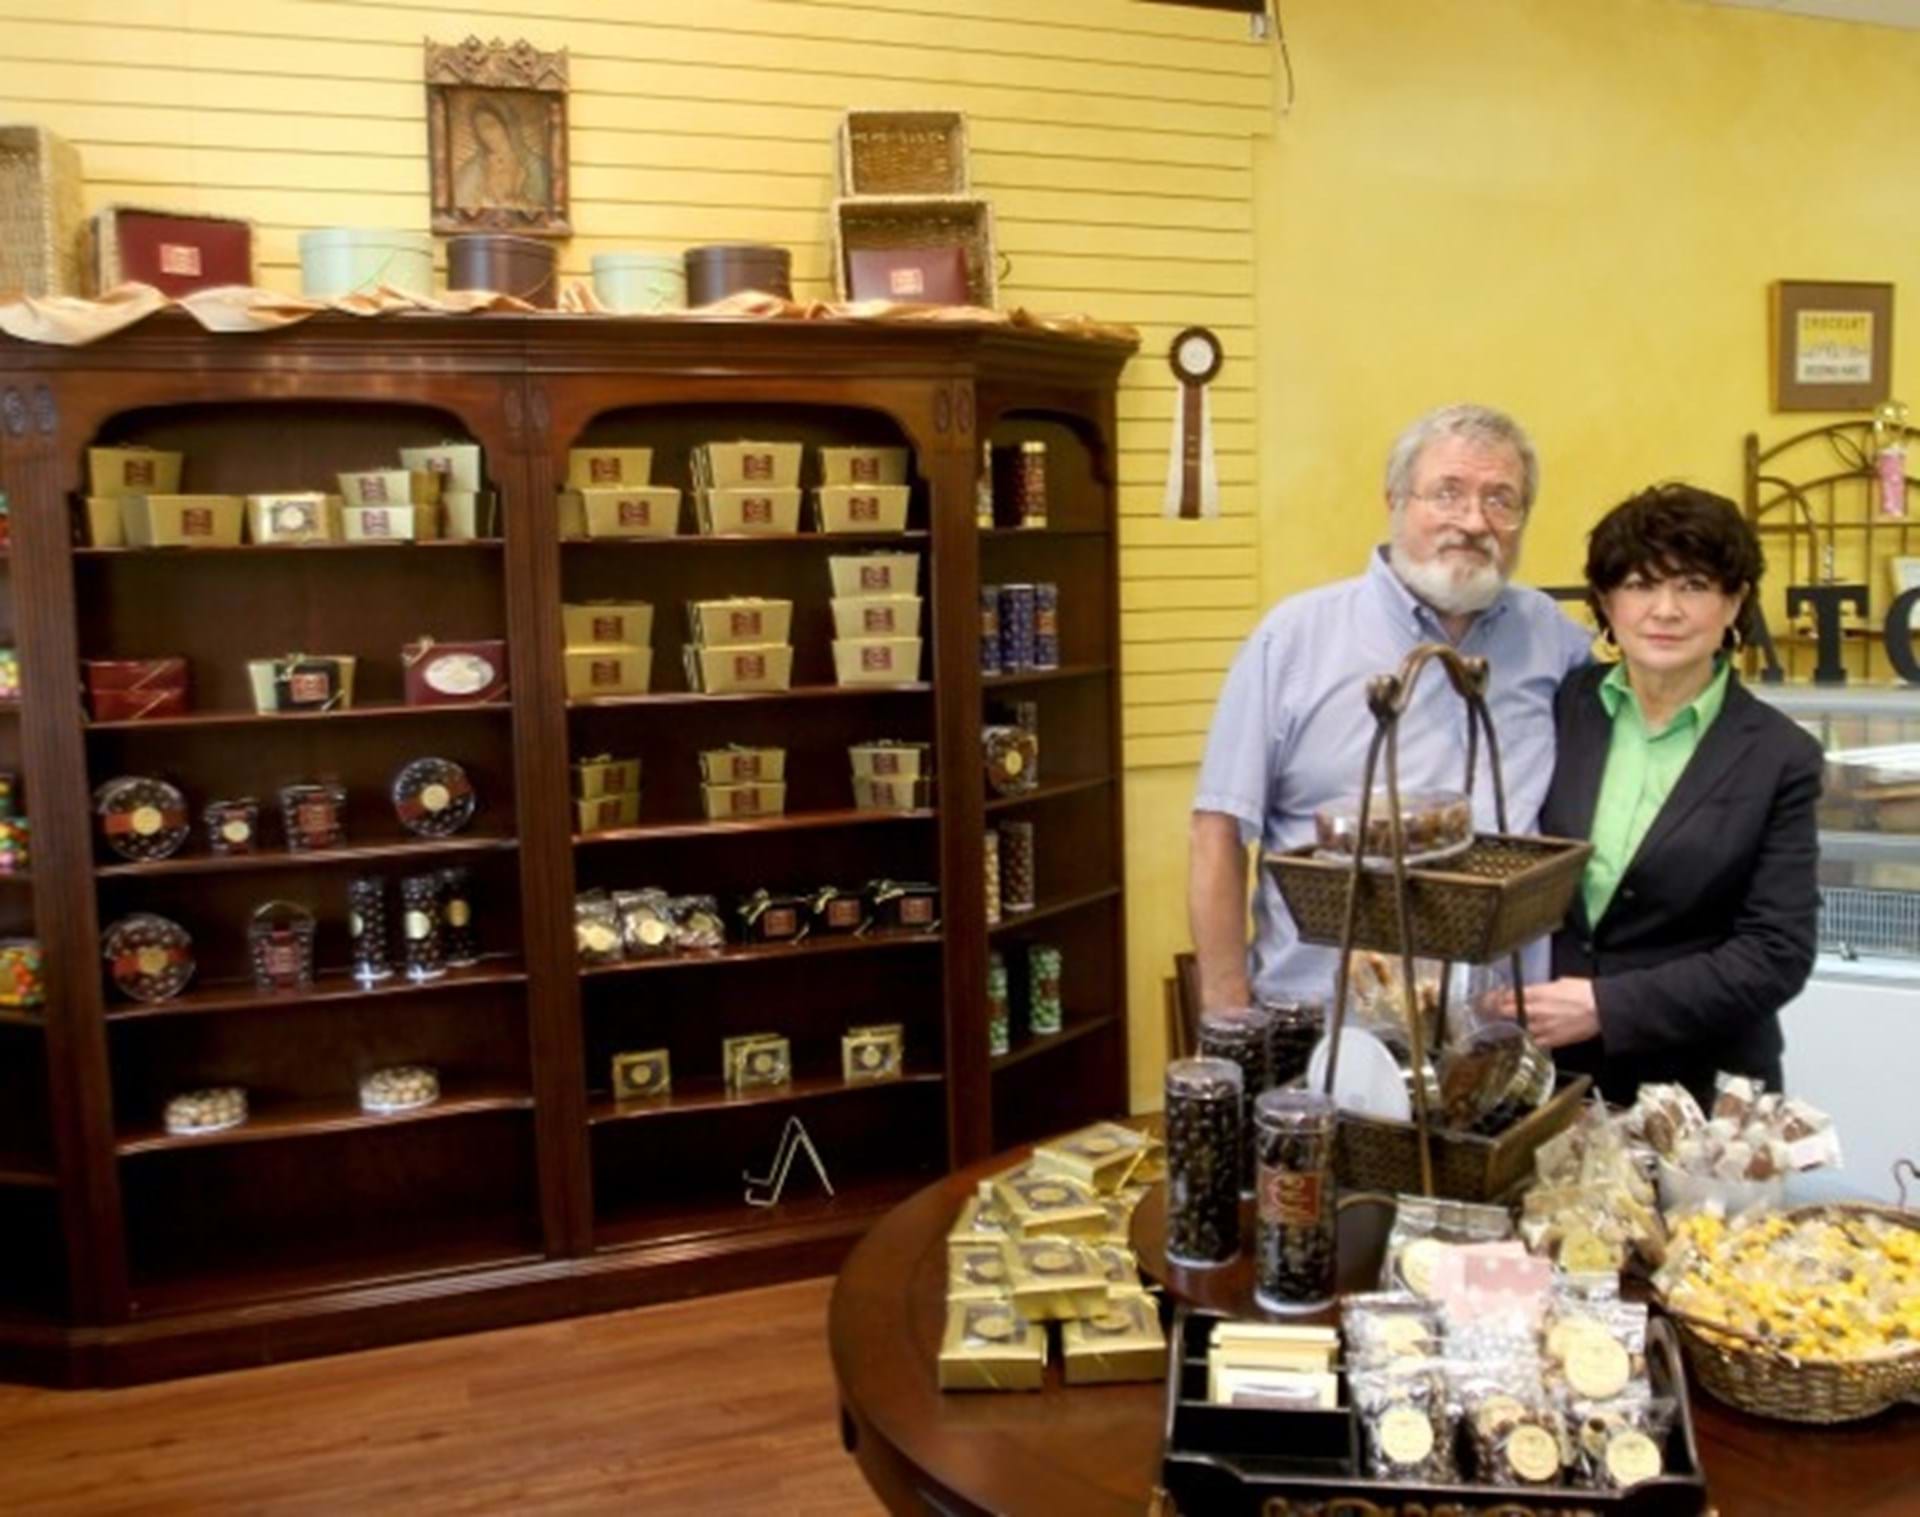 Rose & Bob Mohr - owners of Chocolate Manor